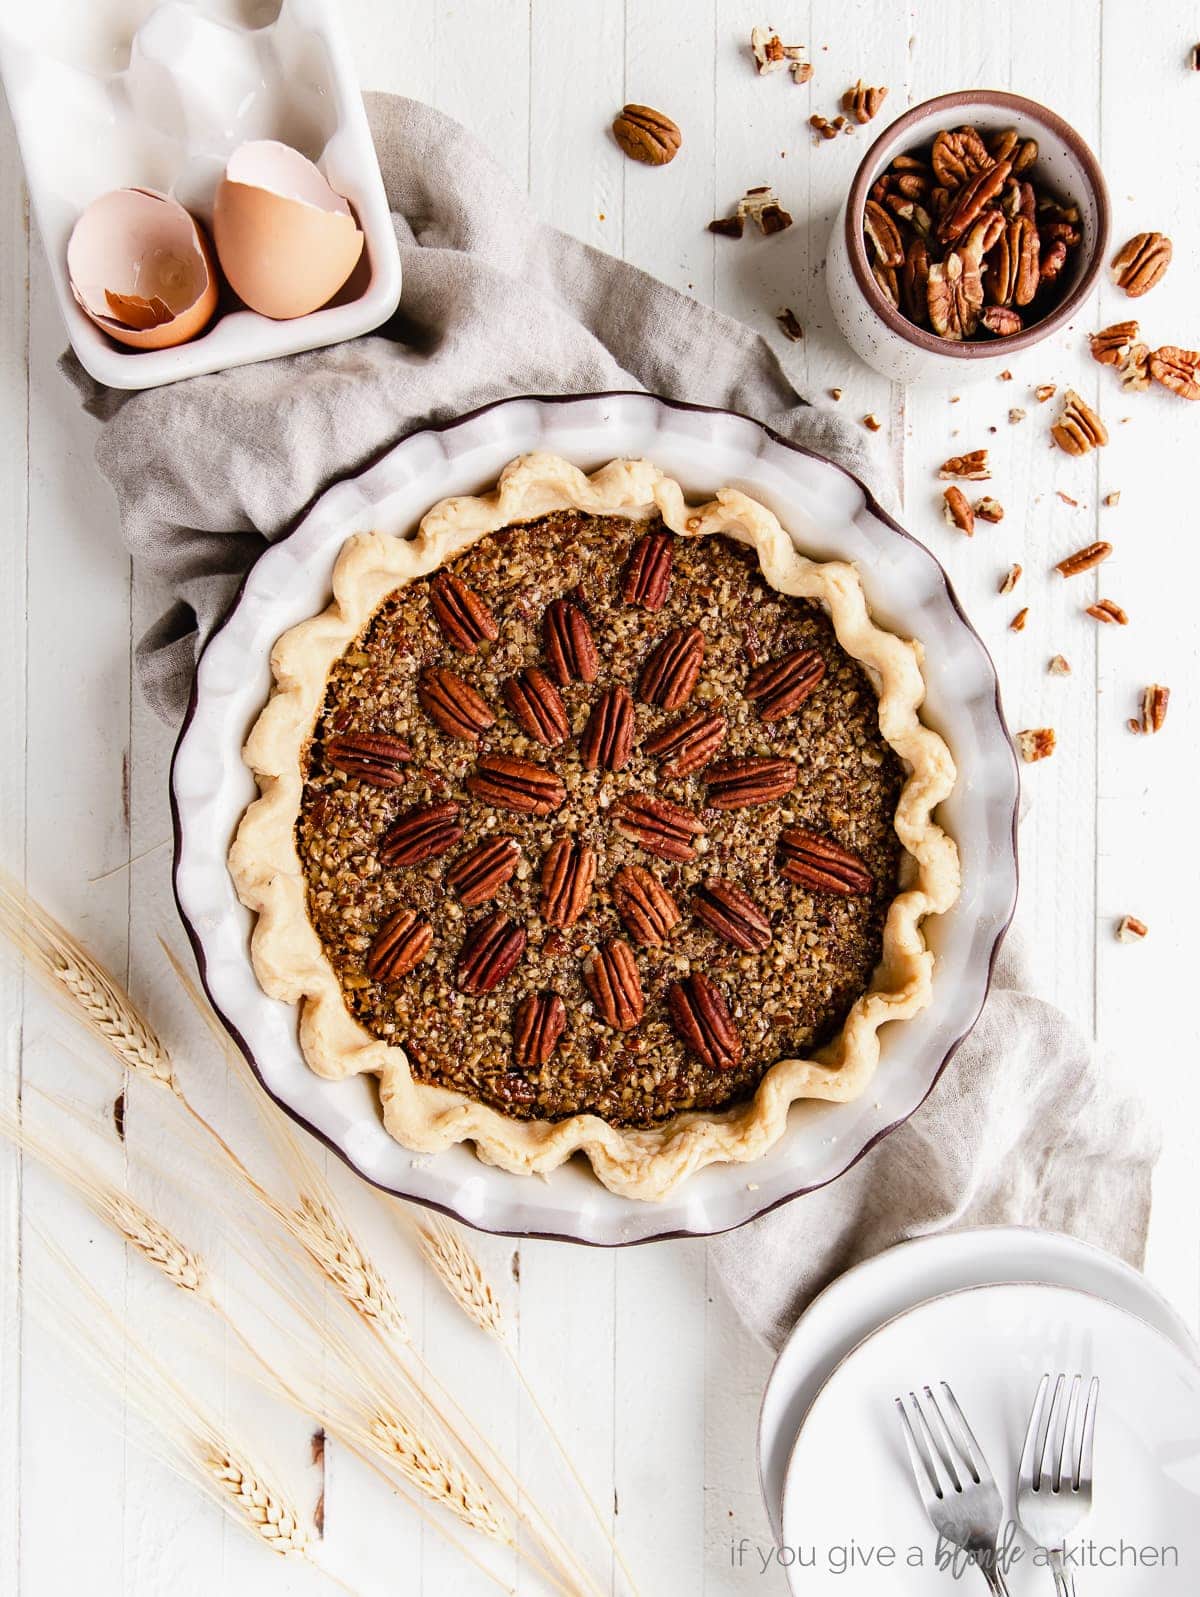 pecan pie in a ceramic pie dish with pecan halves on top arranged to radiate out